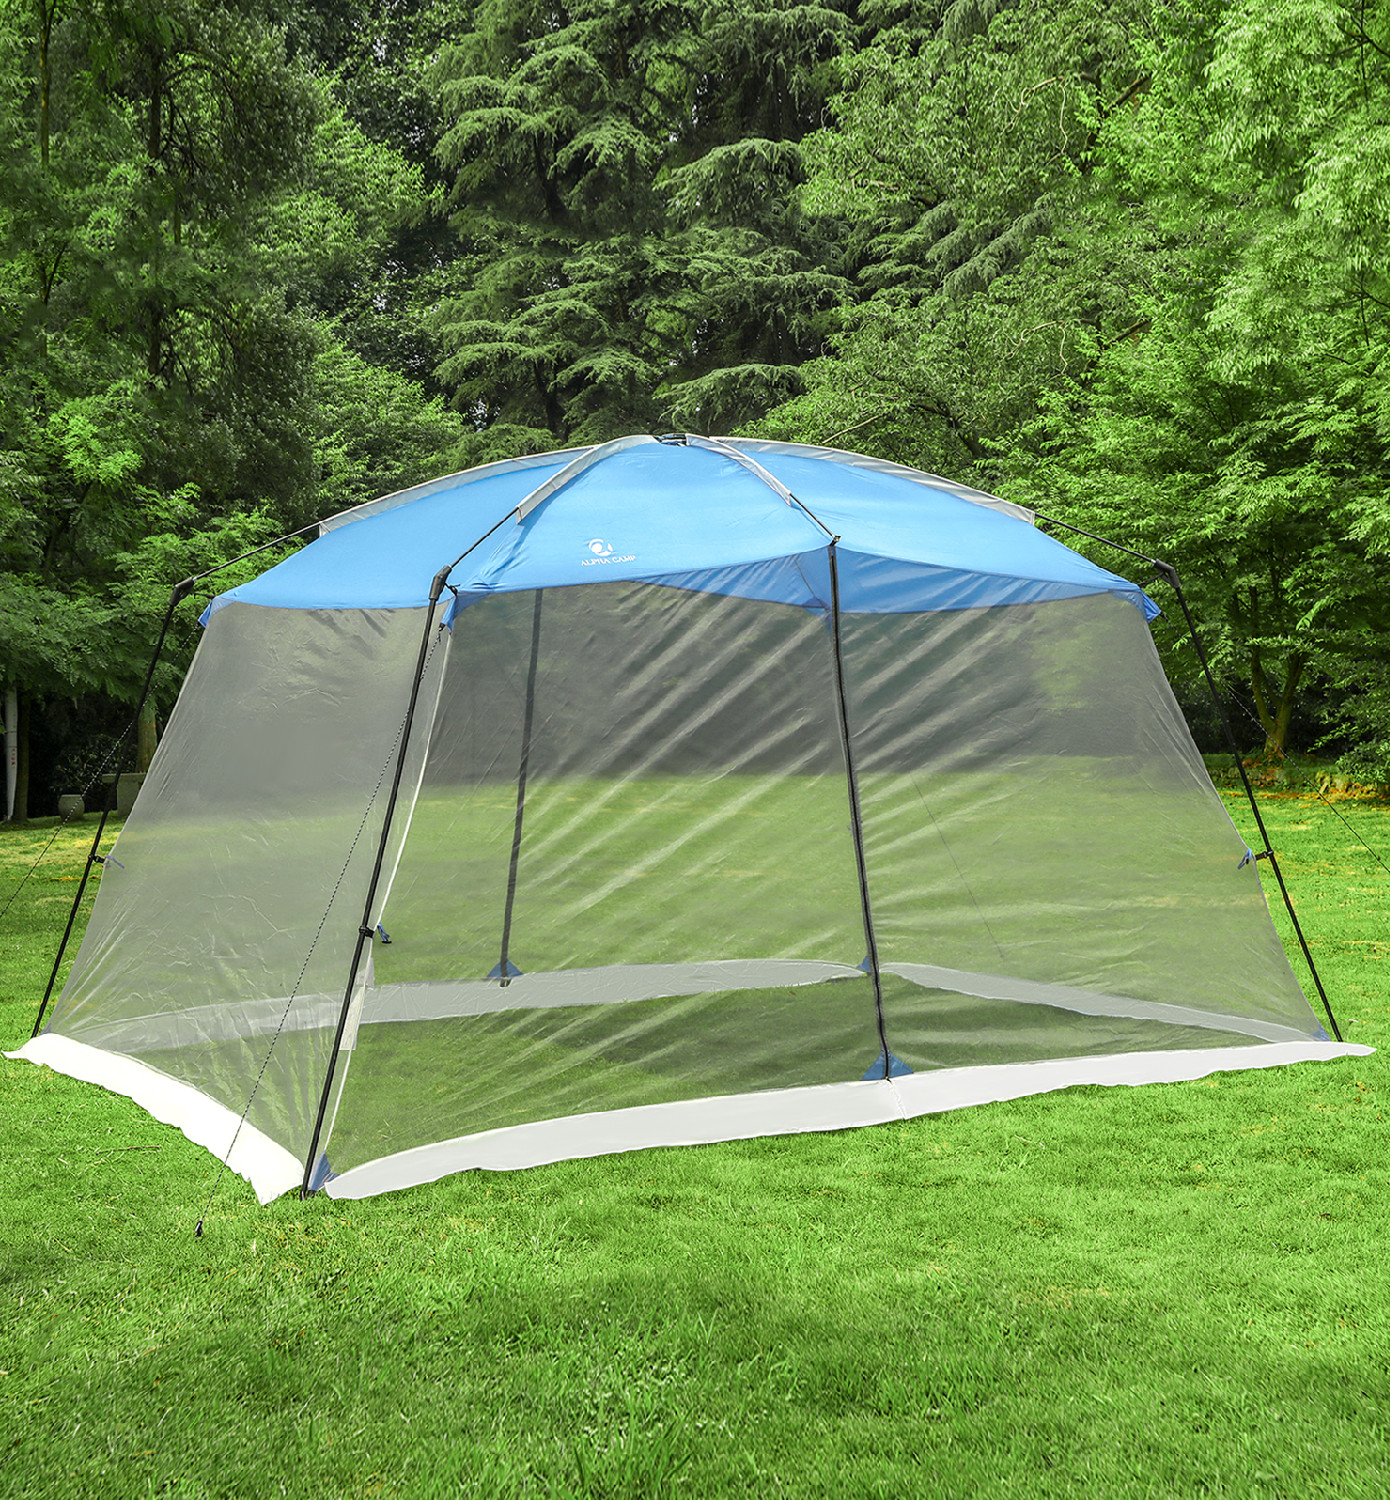 Alpha Camper 13' x 9' Screen House Canopy Sun Shade with One Room, Blue - image 5 of 9